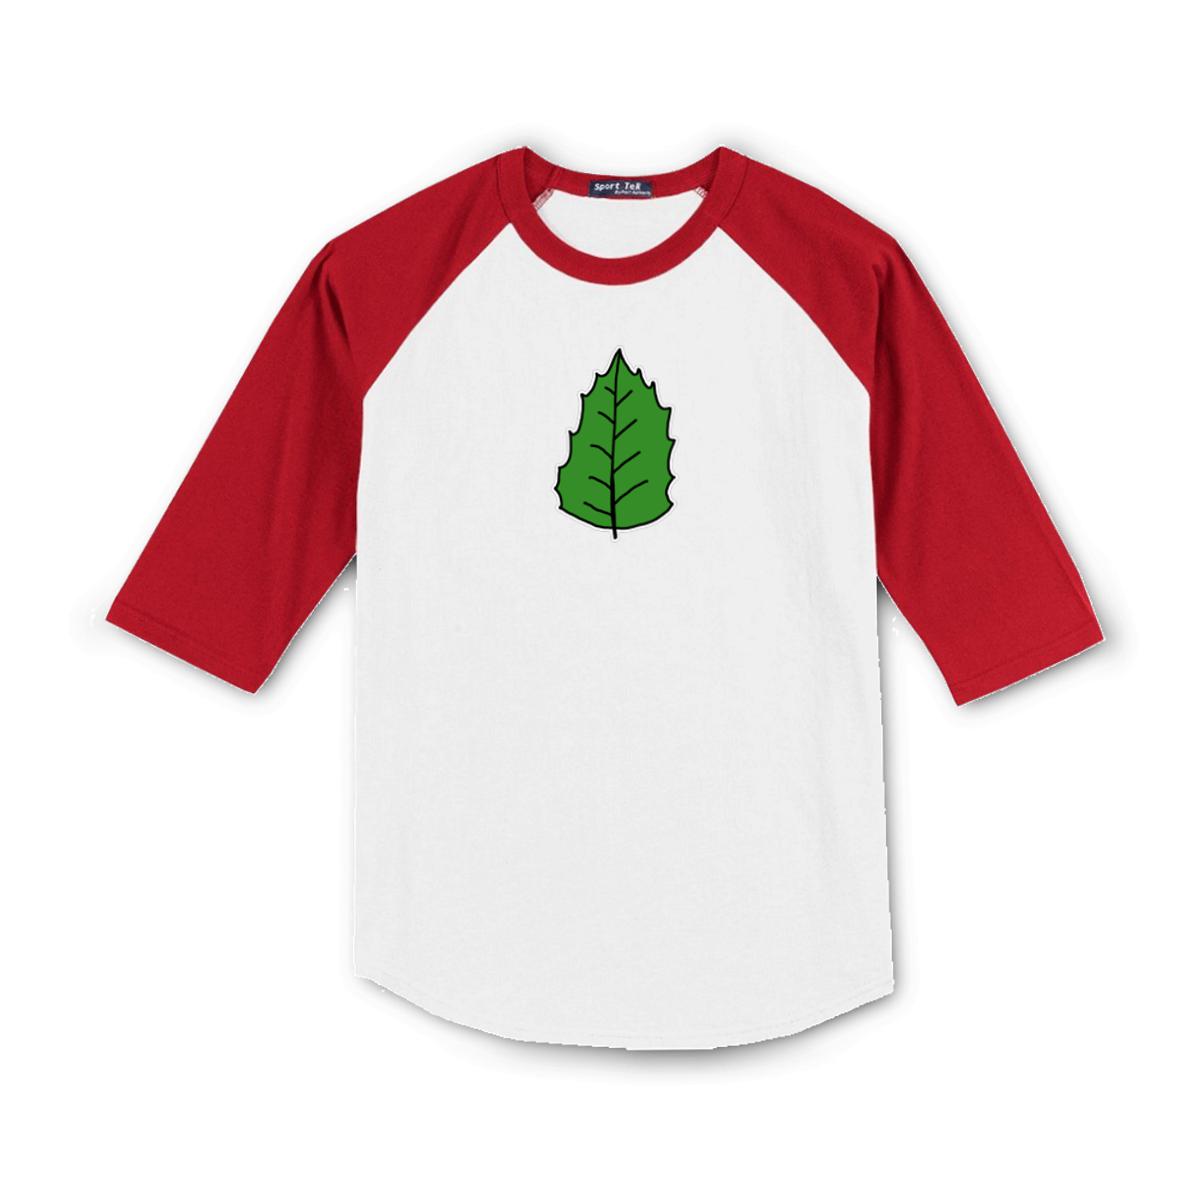 Holly Leaf Men's Raglan Tee Small white-red